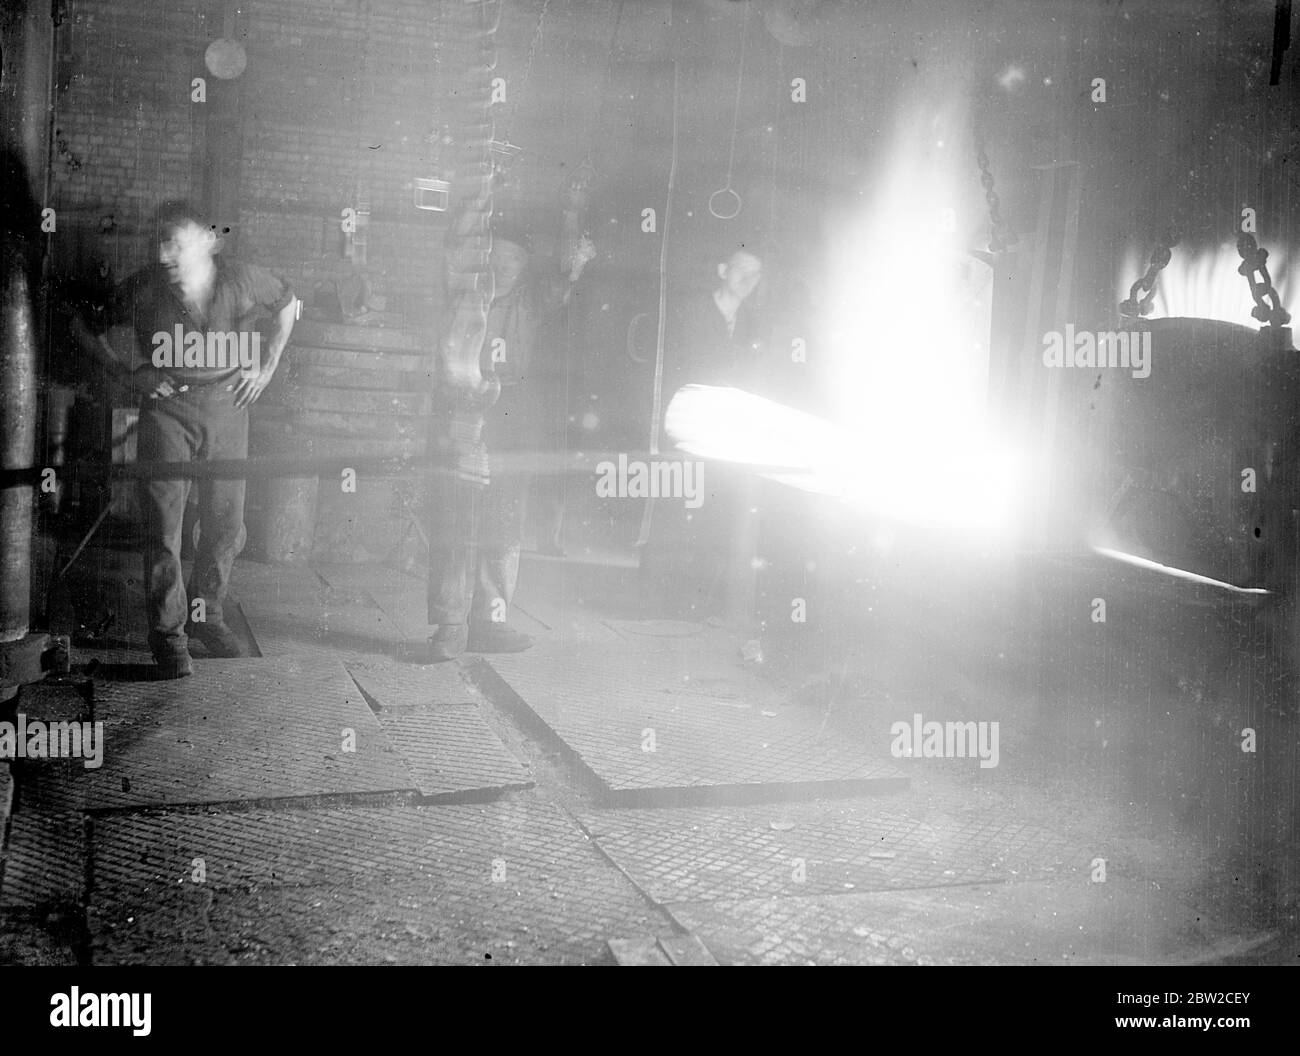 Where Britain forges victory. This pictures were taken in a Royal Ordinance factory of the Ministry of Supply where, thousands of workers are producing arms and ammunition which will help to ensure the victory of Britain and her Allies. Photo shows: Sparks fly from a converter (steelmaking furnace). 13 November 1939 Stock Photo